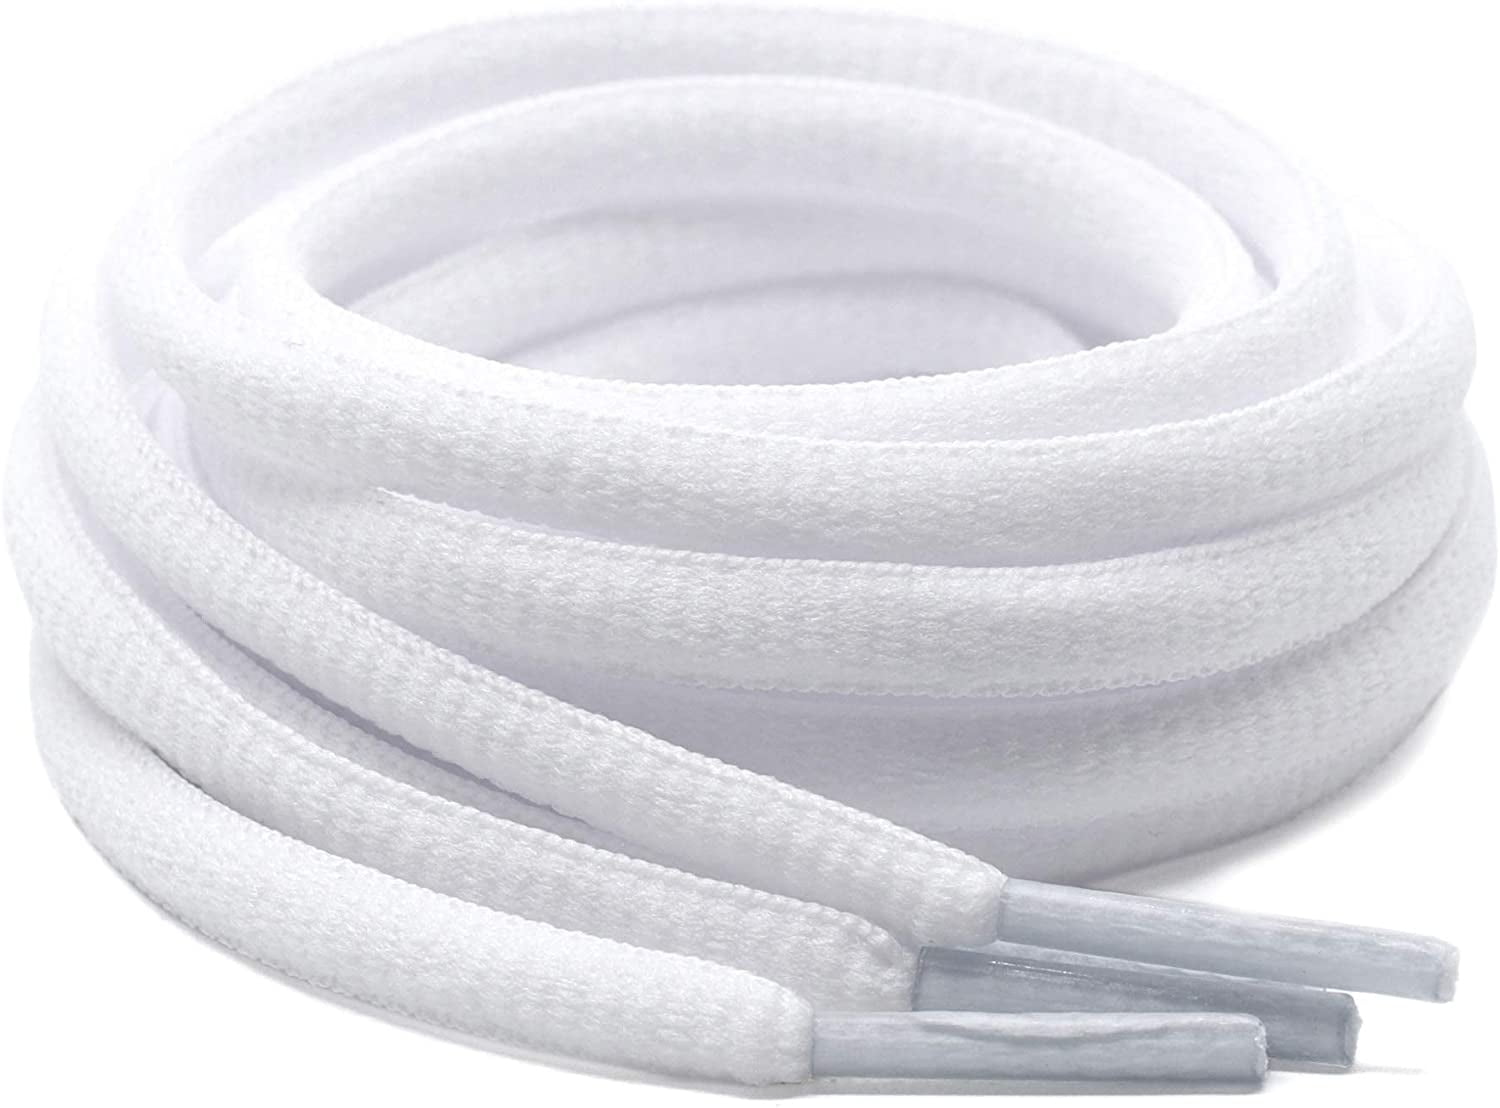 2 Pairs Oval 36",45" Athletic Sports Sneaker "White" Shoelace Strings 